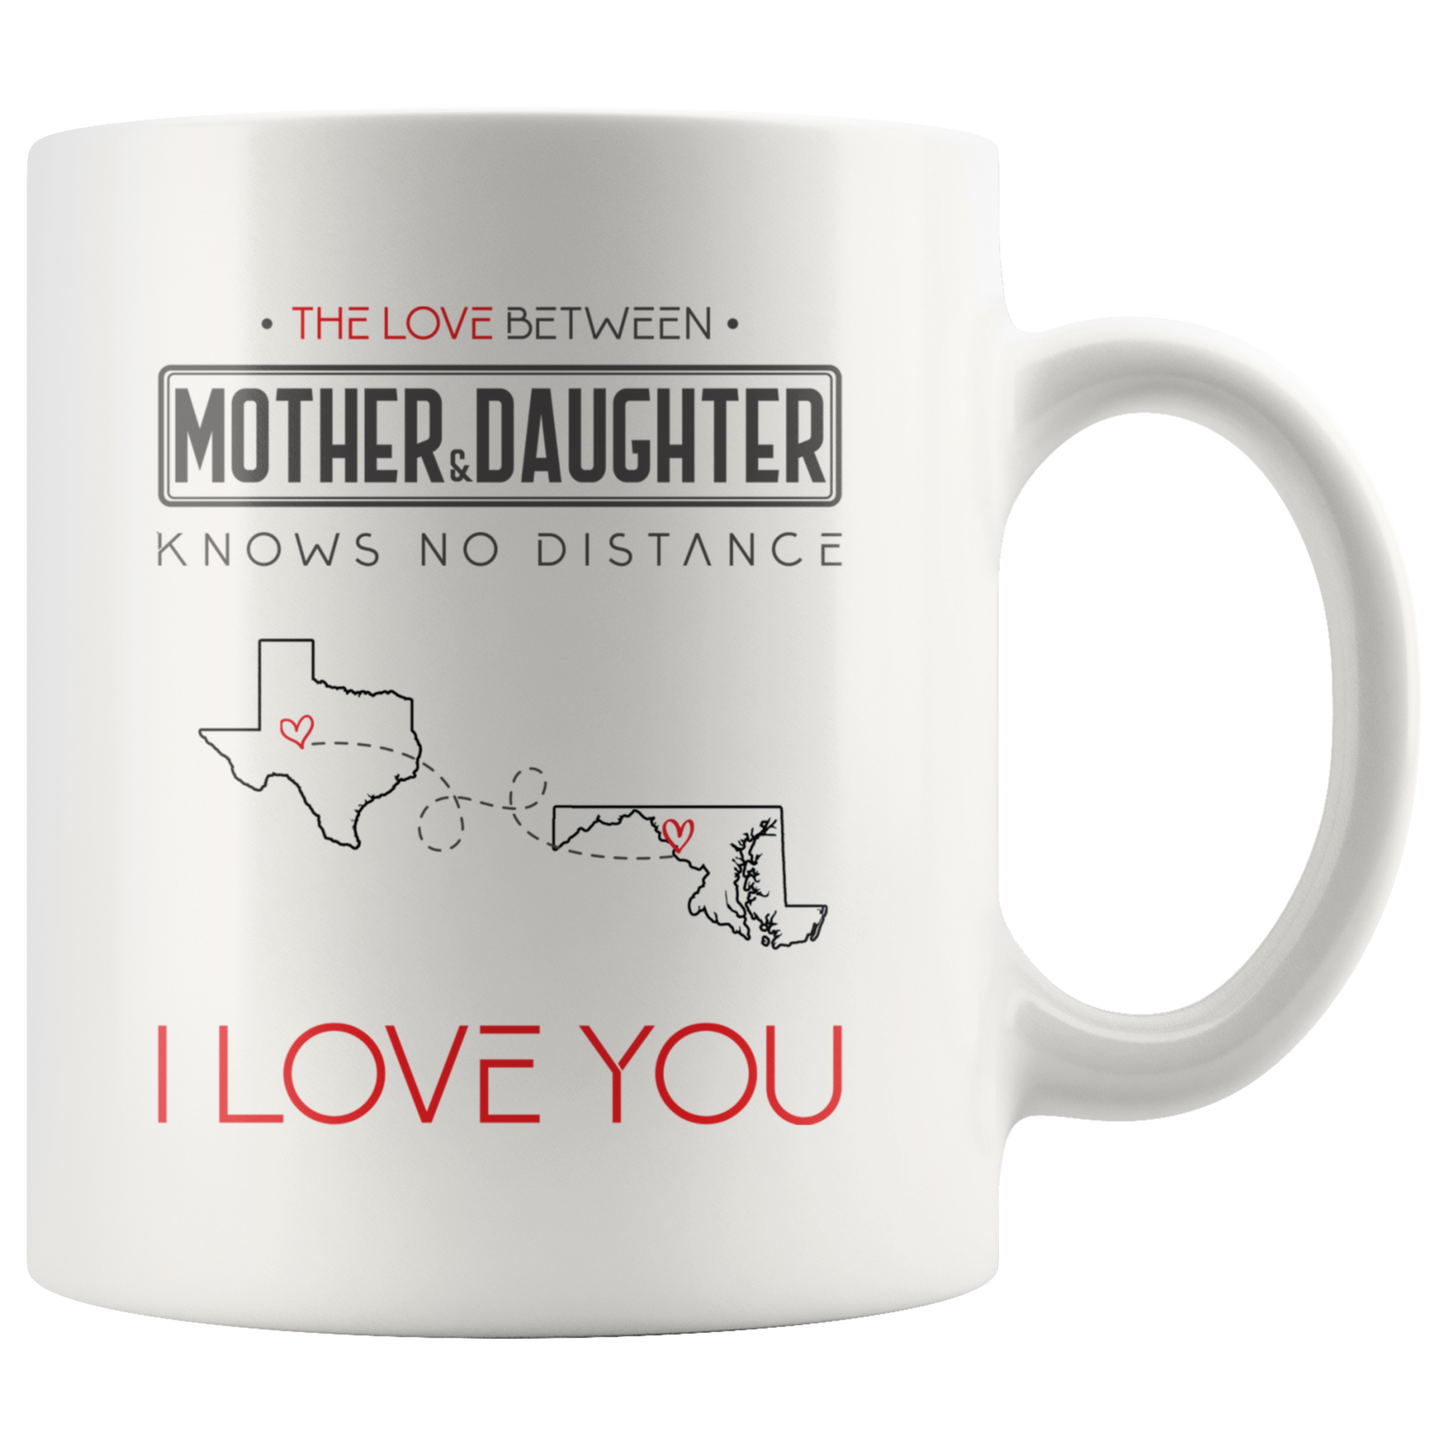 ND-21313864-sp-24254 - [ Texas | Maryland ]Mom And Daughter Accent Mug 11 oz Red - The Love Between Mot